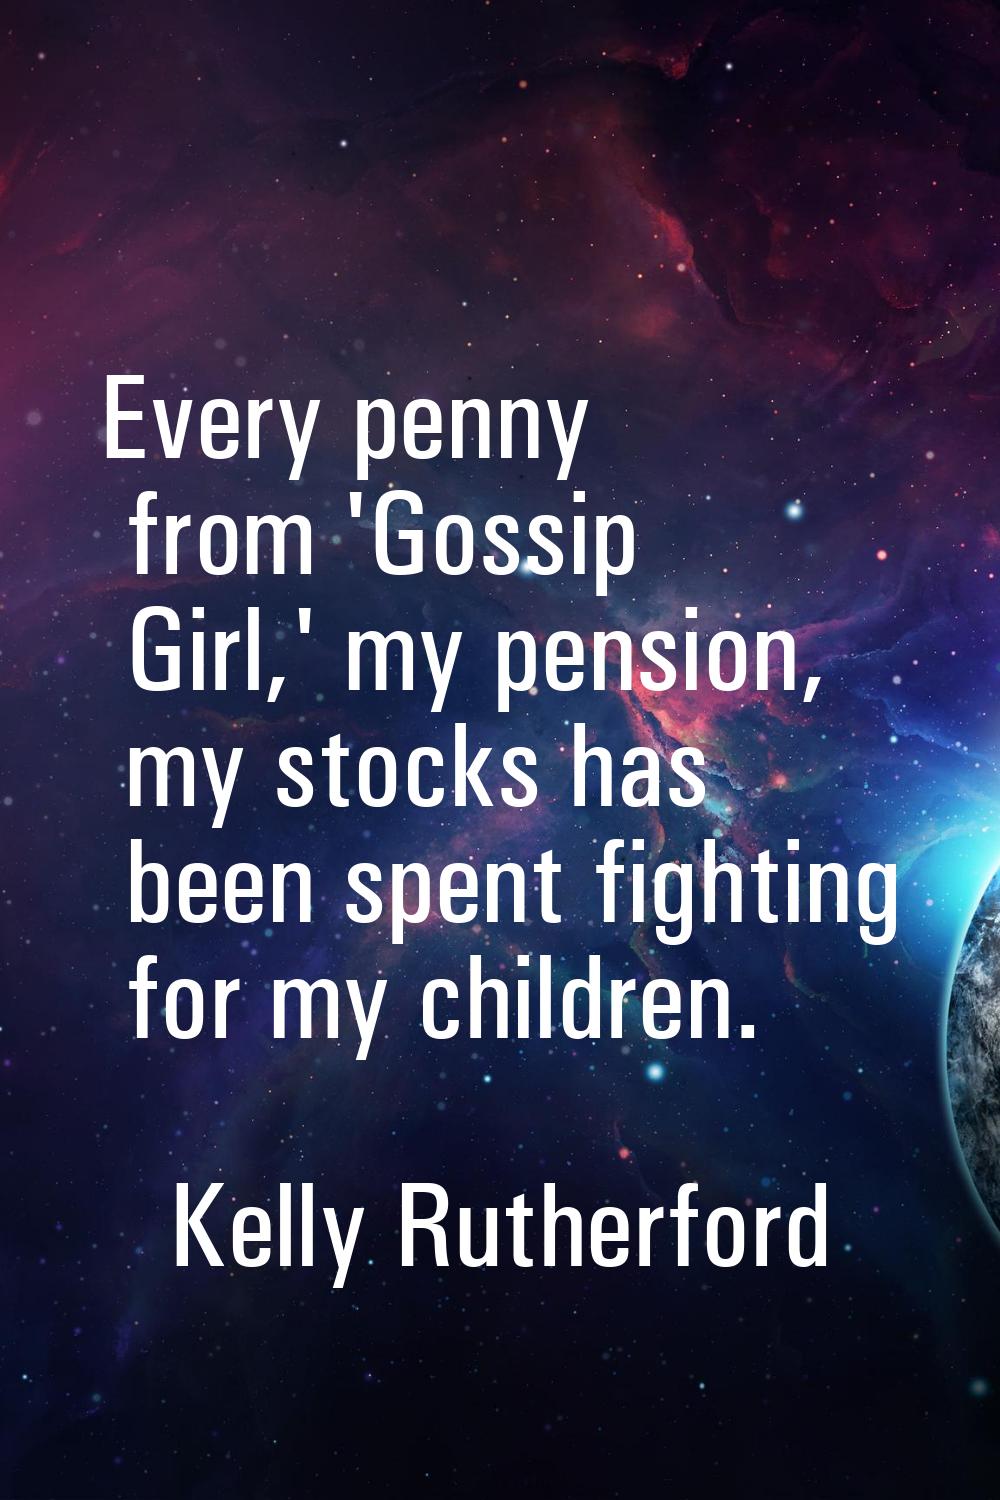 Every penny from 'Gossip Girl,' my pension, my stocks has been spent fighting for my children.